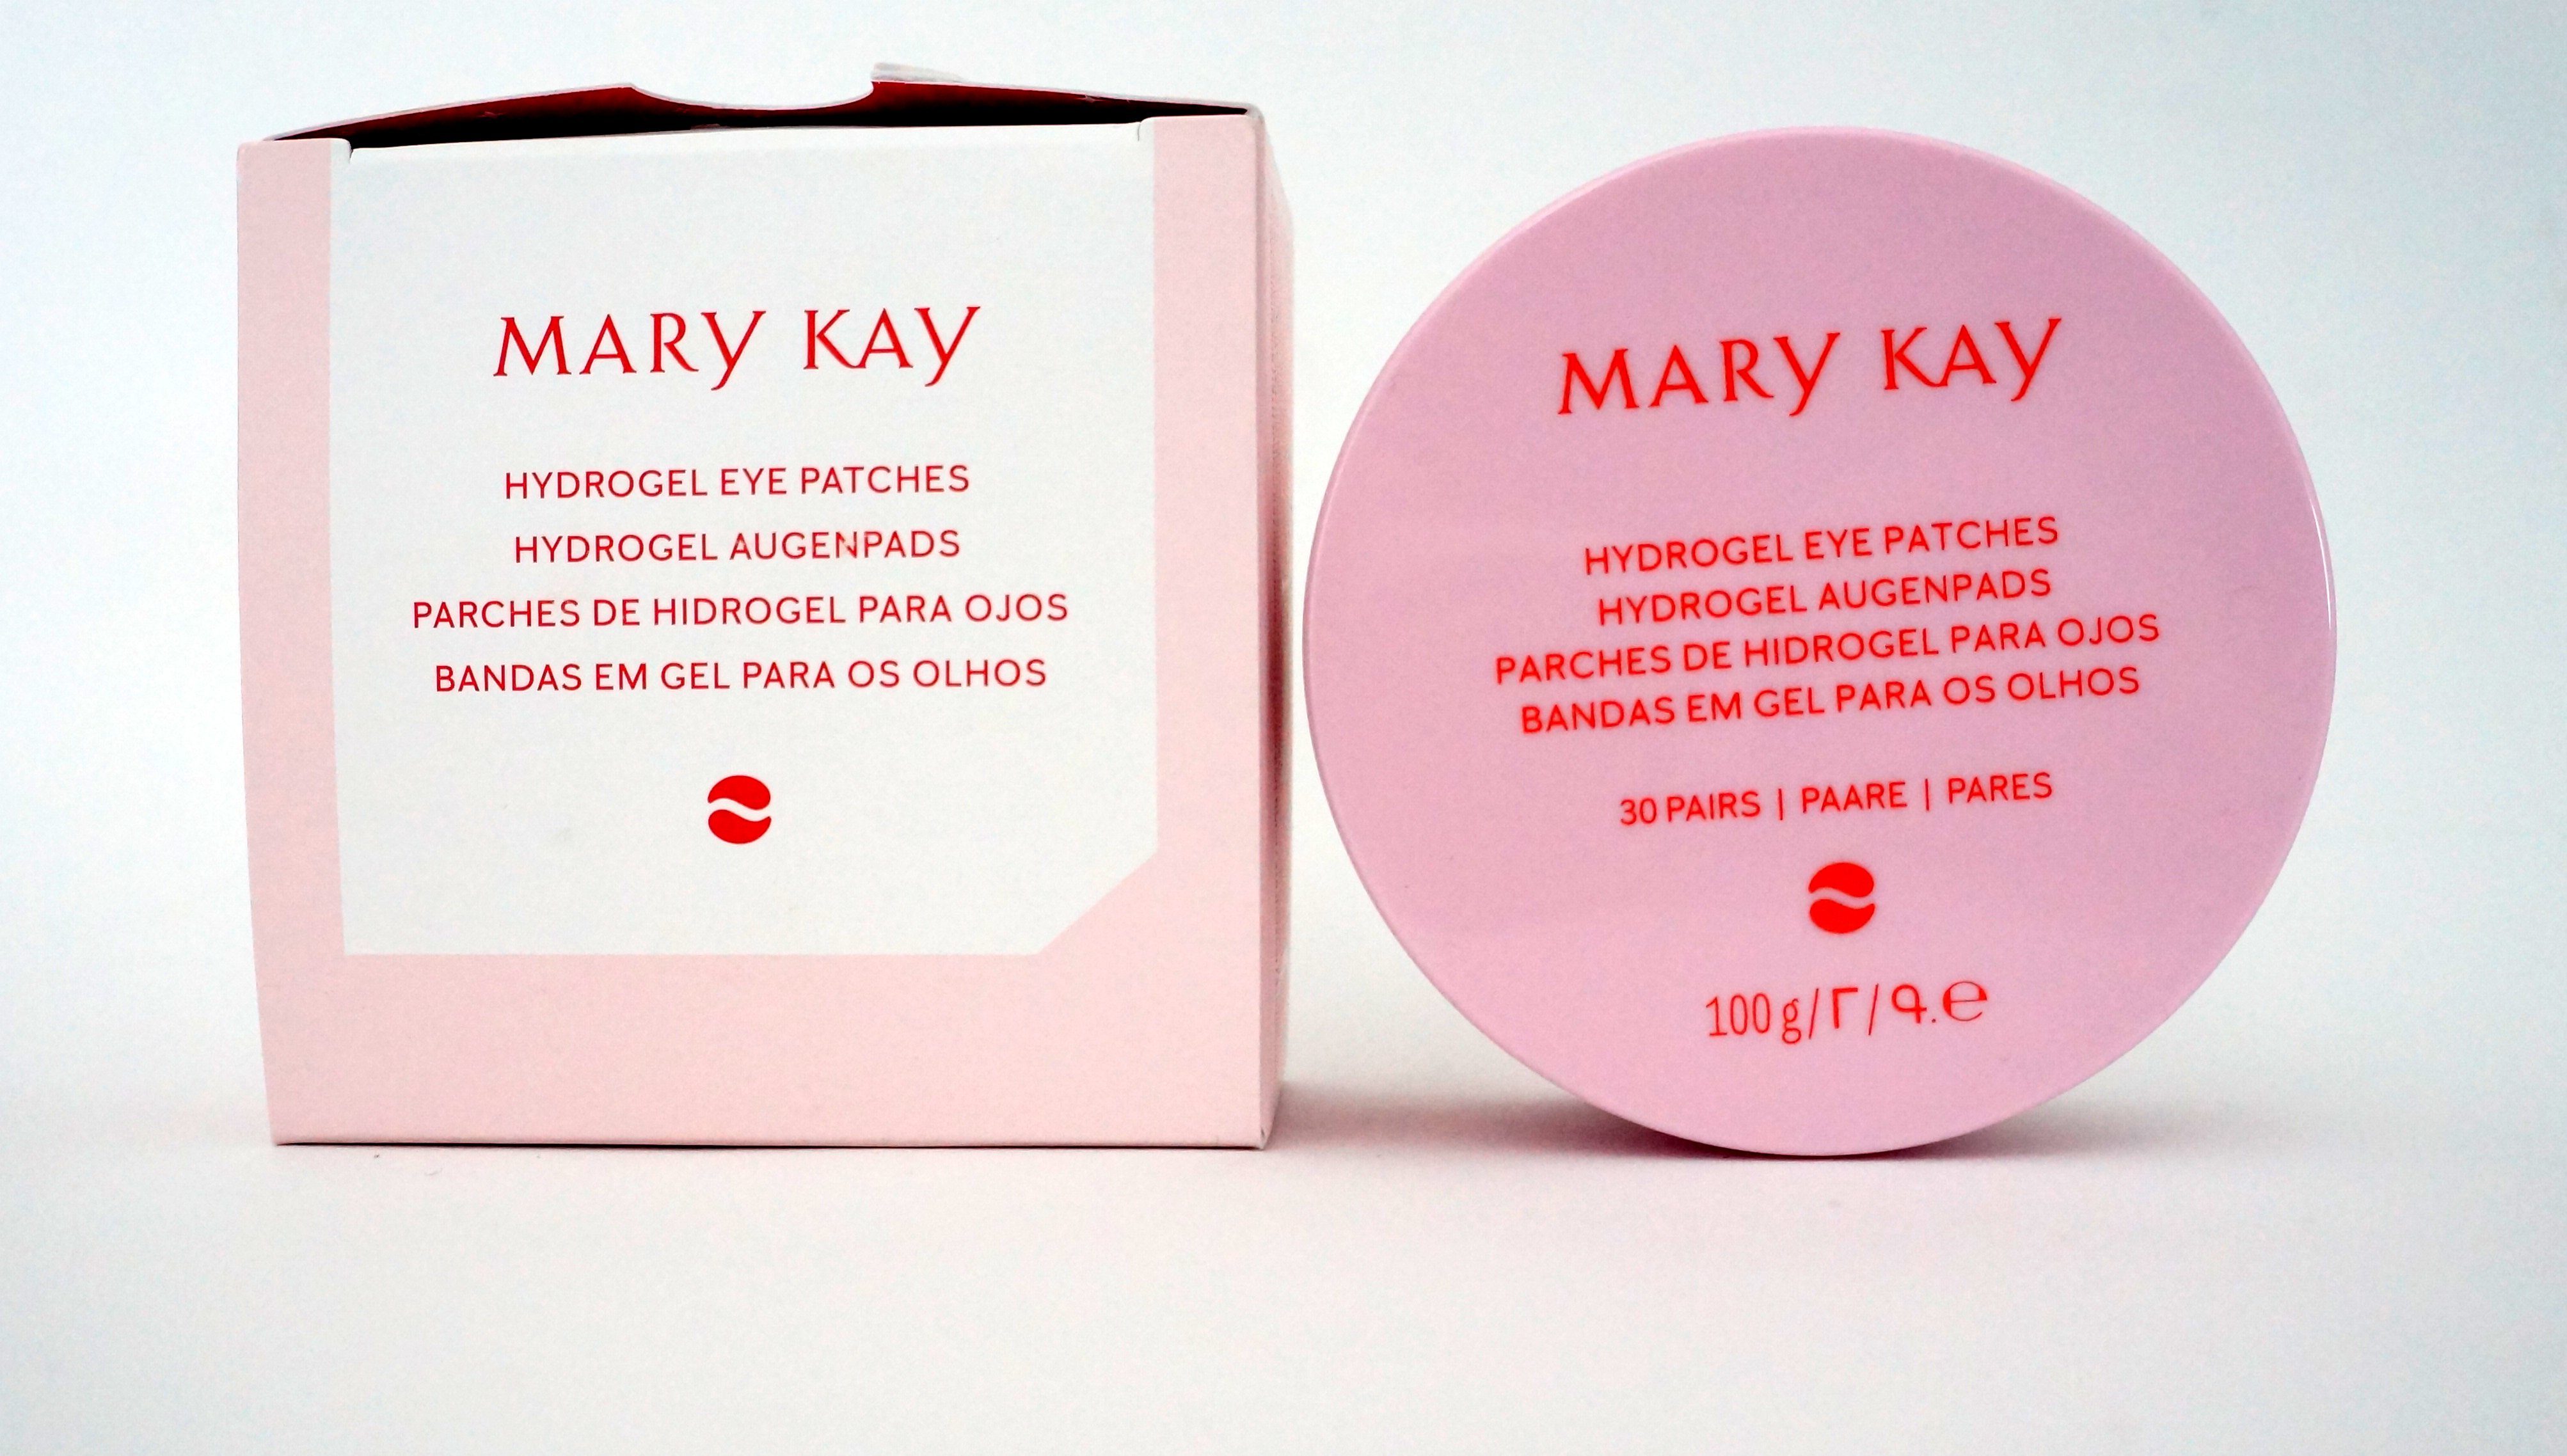 Mary Kay Augenpads Hydrogel Eye Patches Augenpads 30 pairs - Paare 100 gr